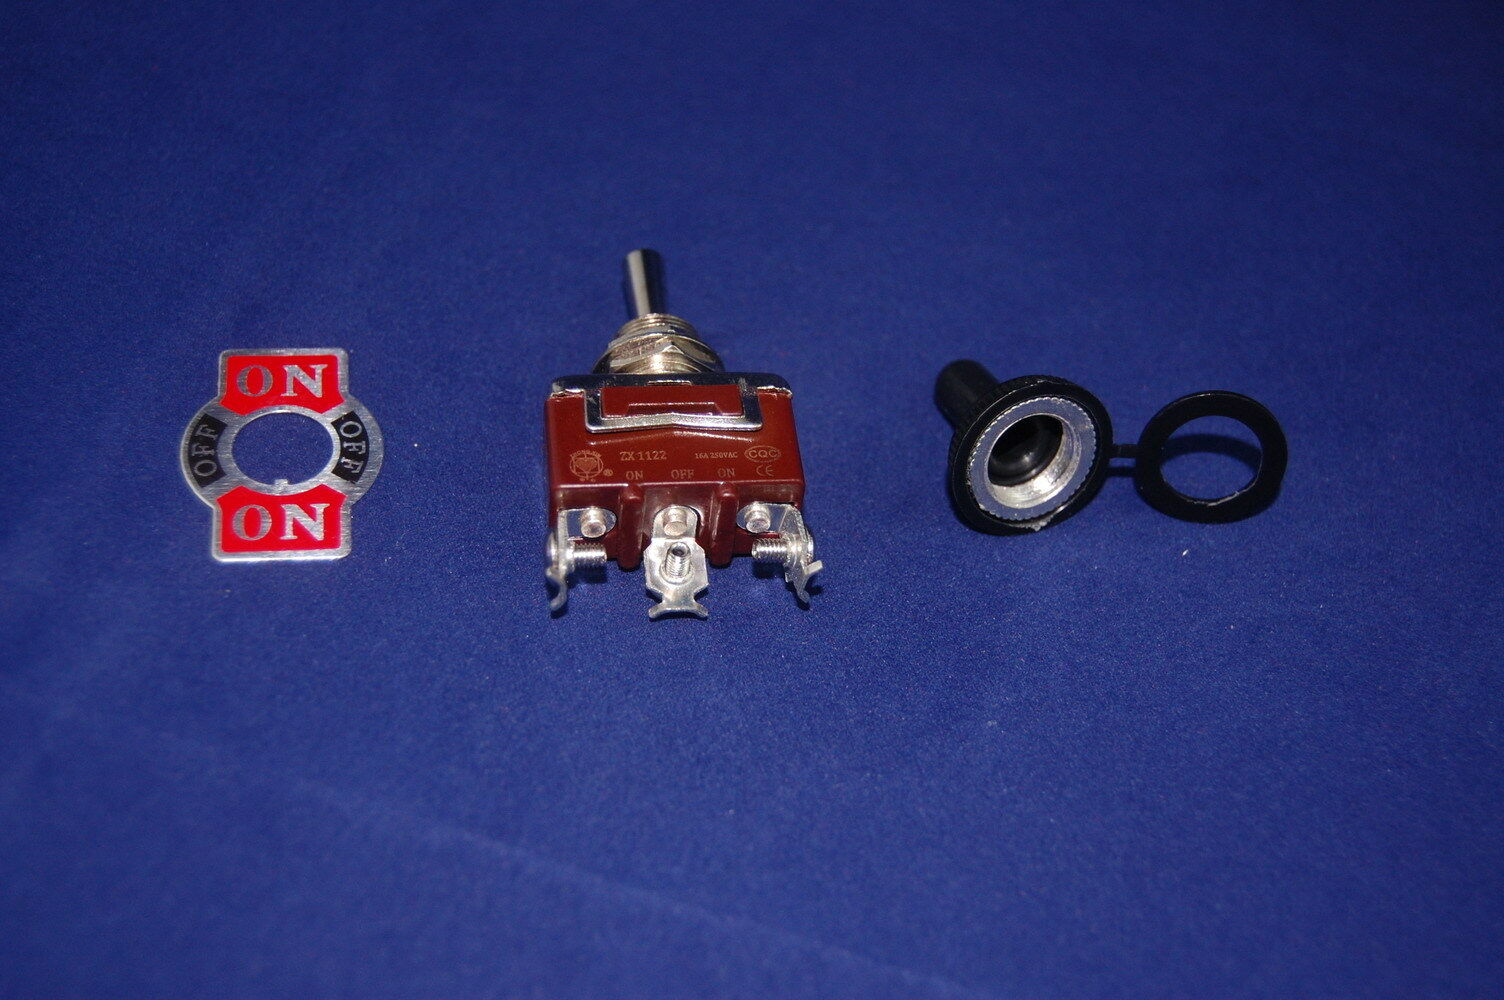 2PCS 3PIN ON-OFF-ON Toggle Switch 15A Screw Termianls MONENTARY water proof 